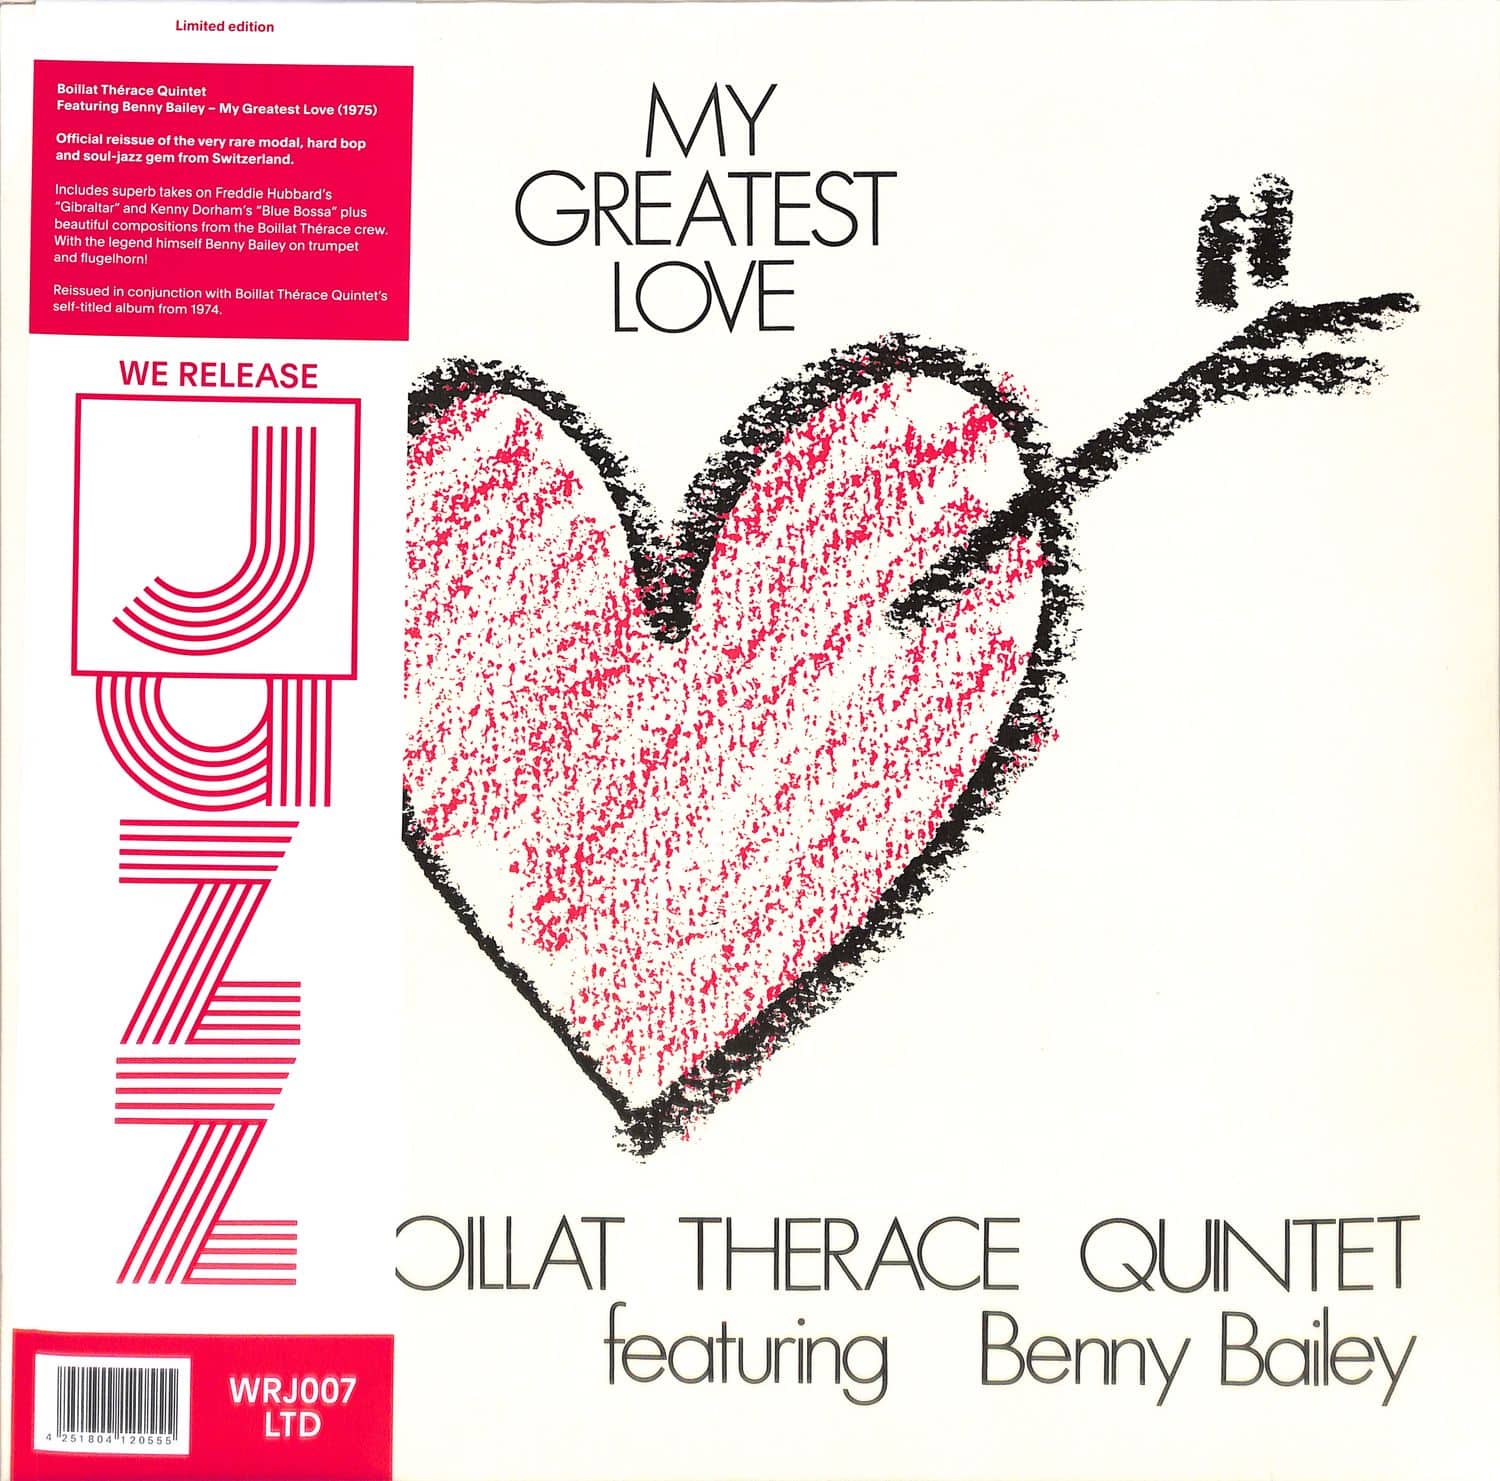 Boillat Therace Quintet featuring Benny - MY GREATEST LOVE 